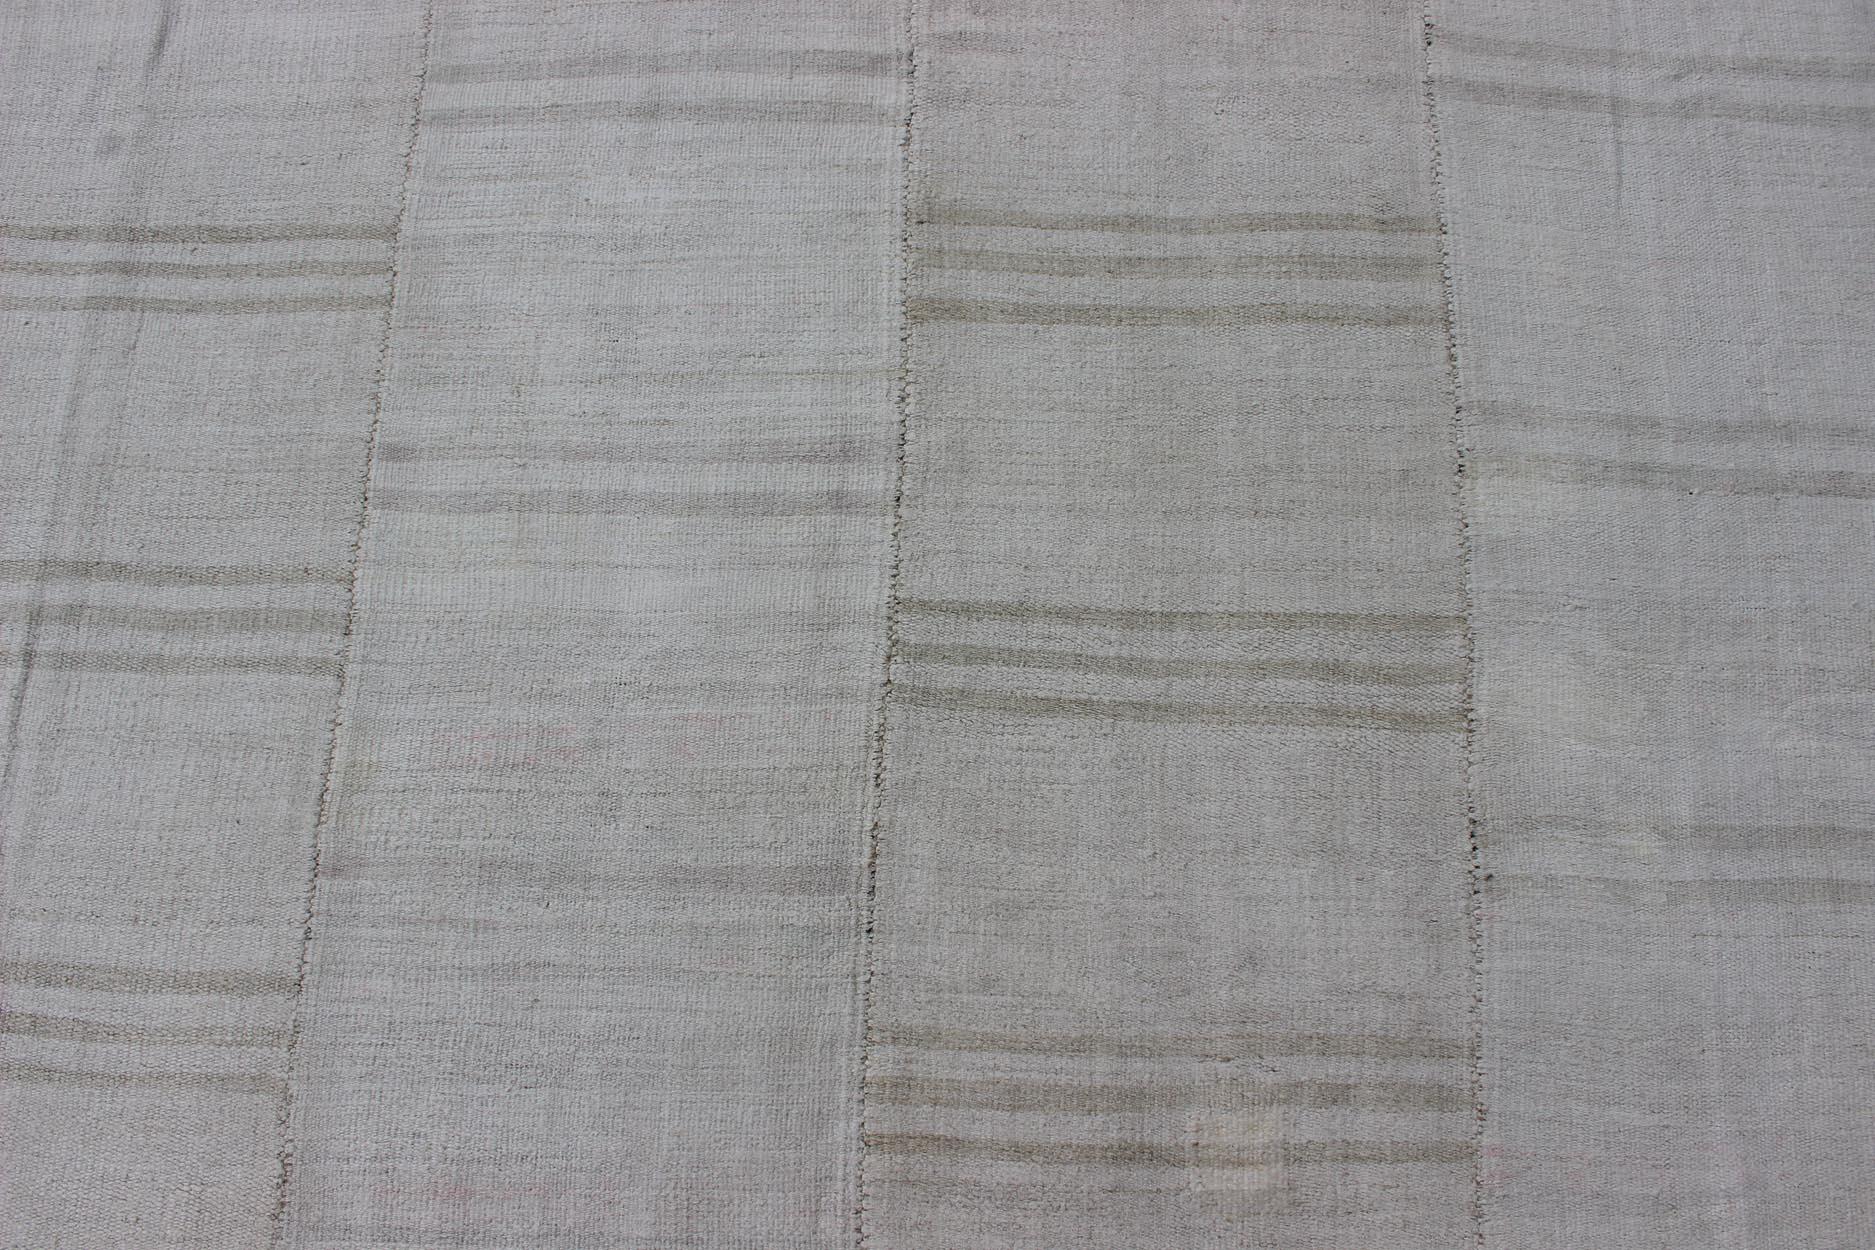 Square Vintage Paneled Flat-Weave with Modern Design in White and Neutral Tones In Good Condition For Sale In Atlanta, GA